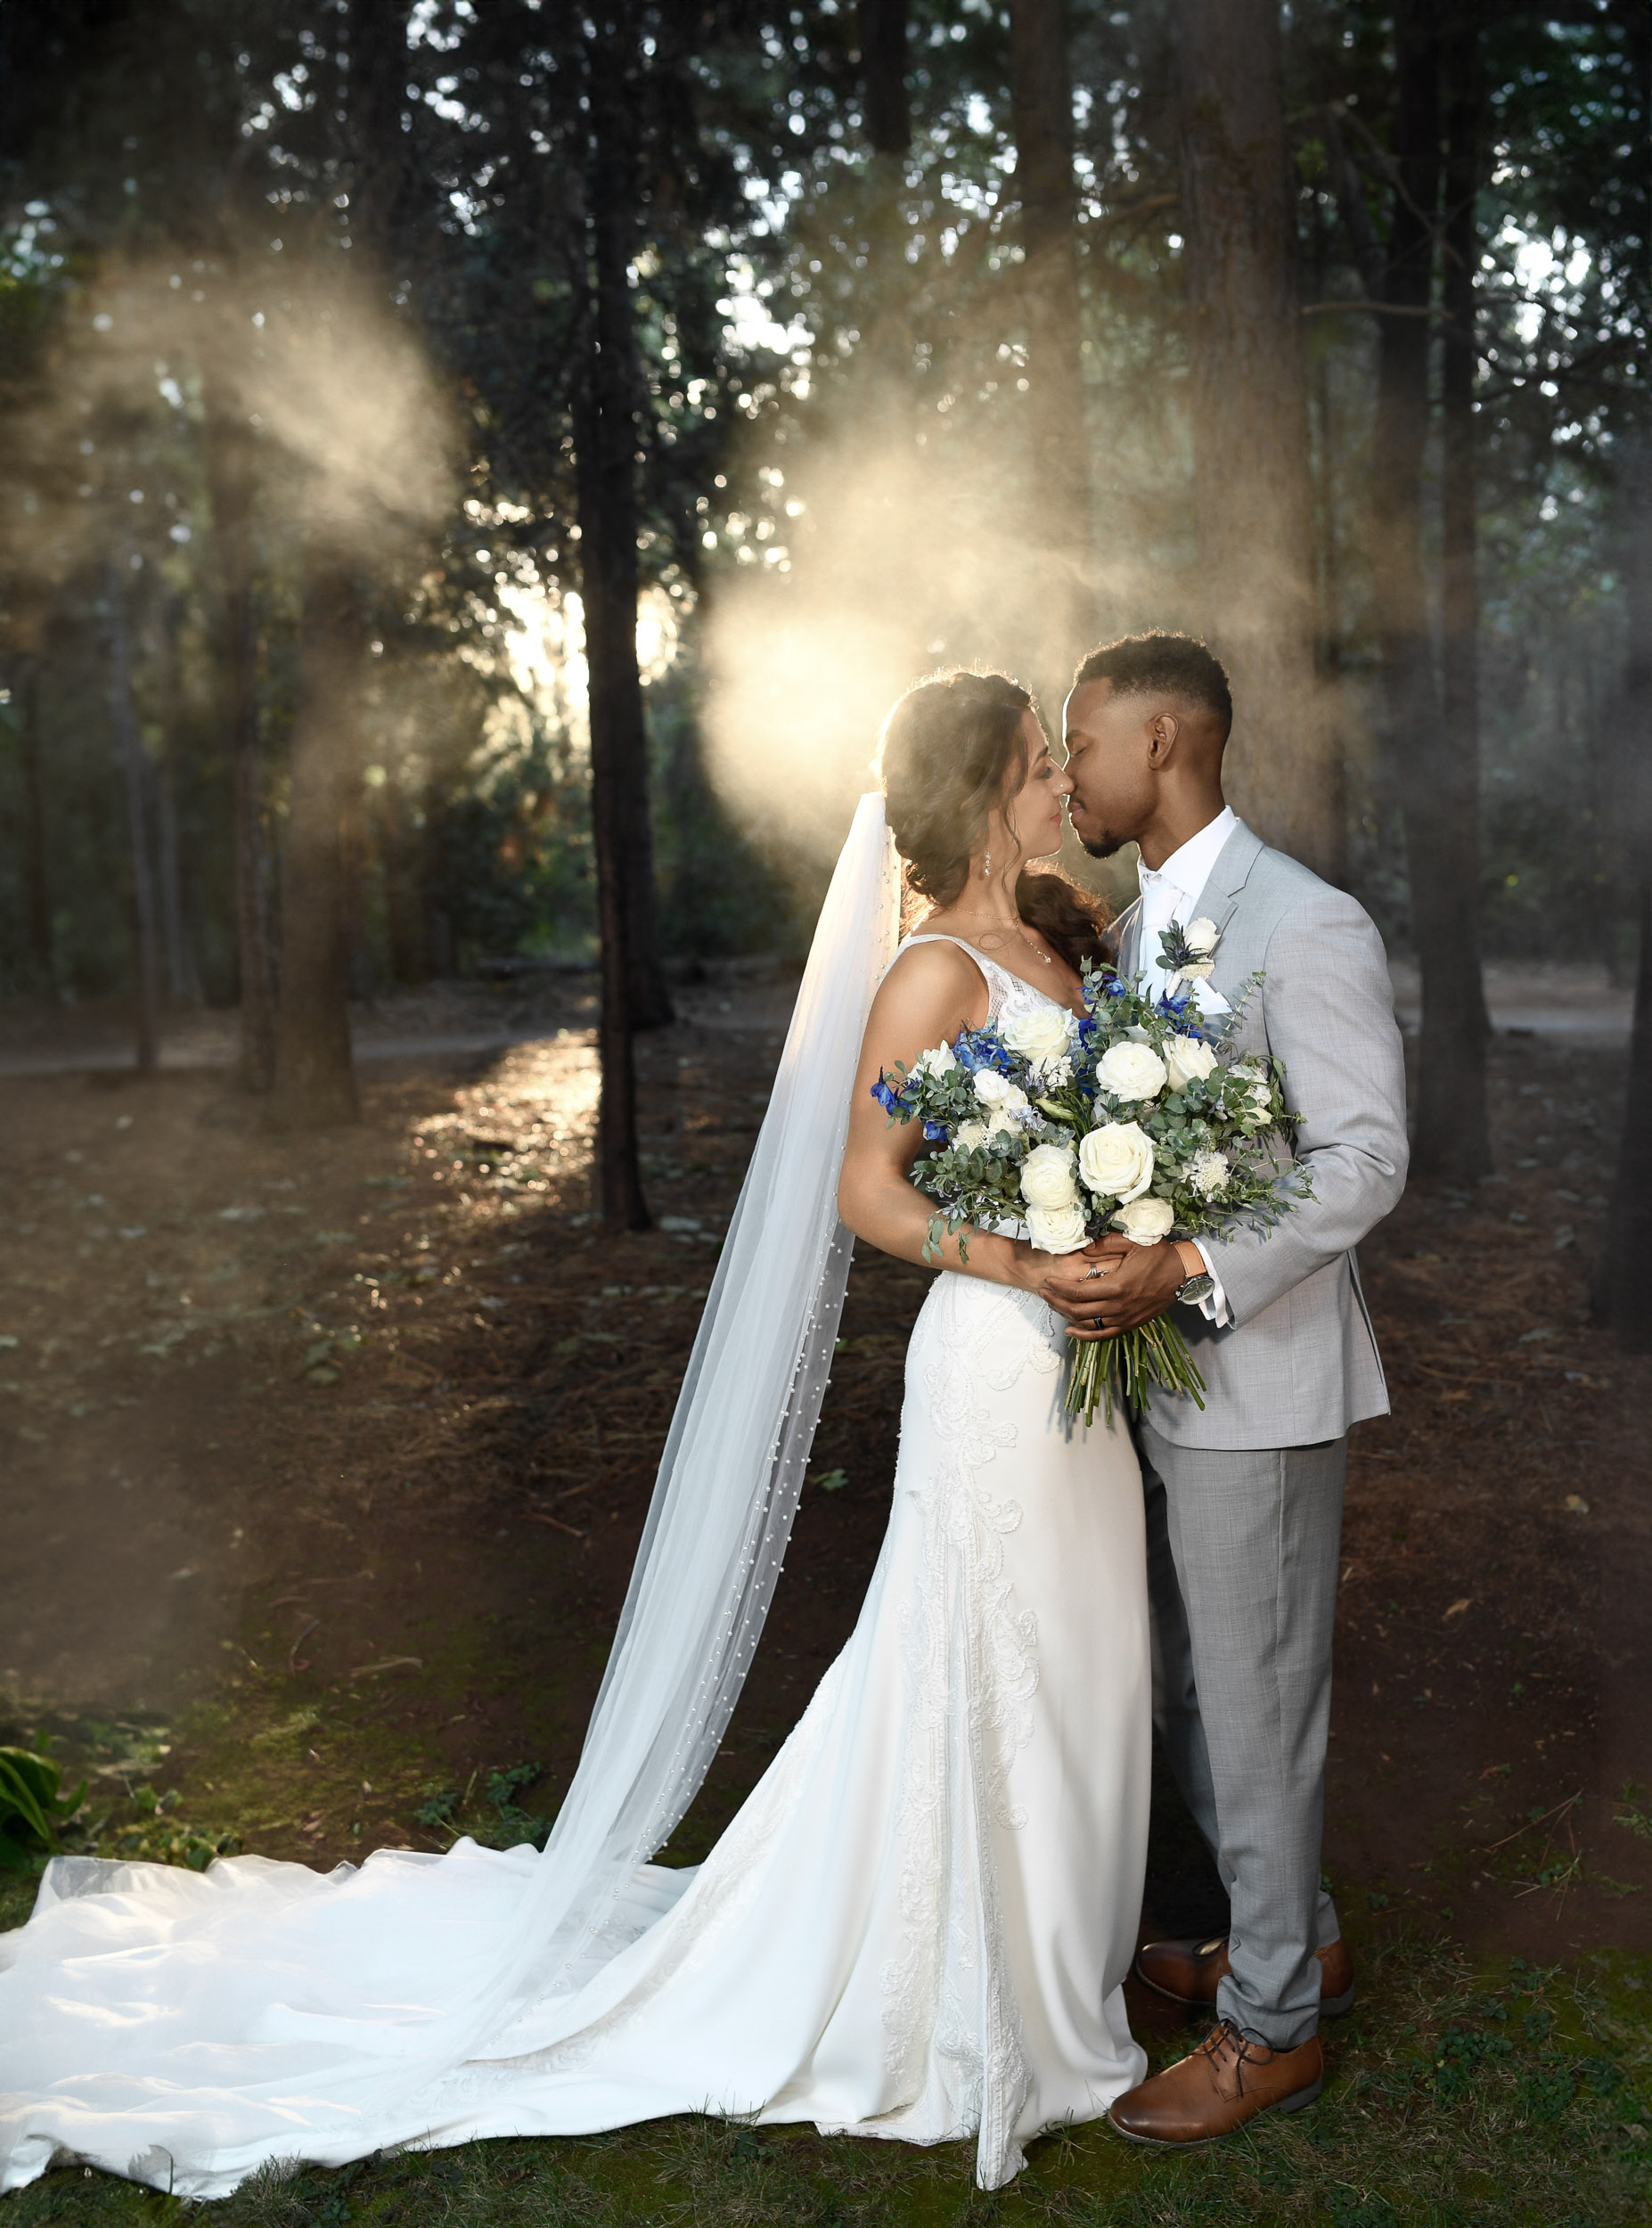 A bride and groom kissing in the woods.